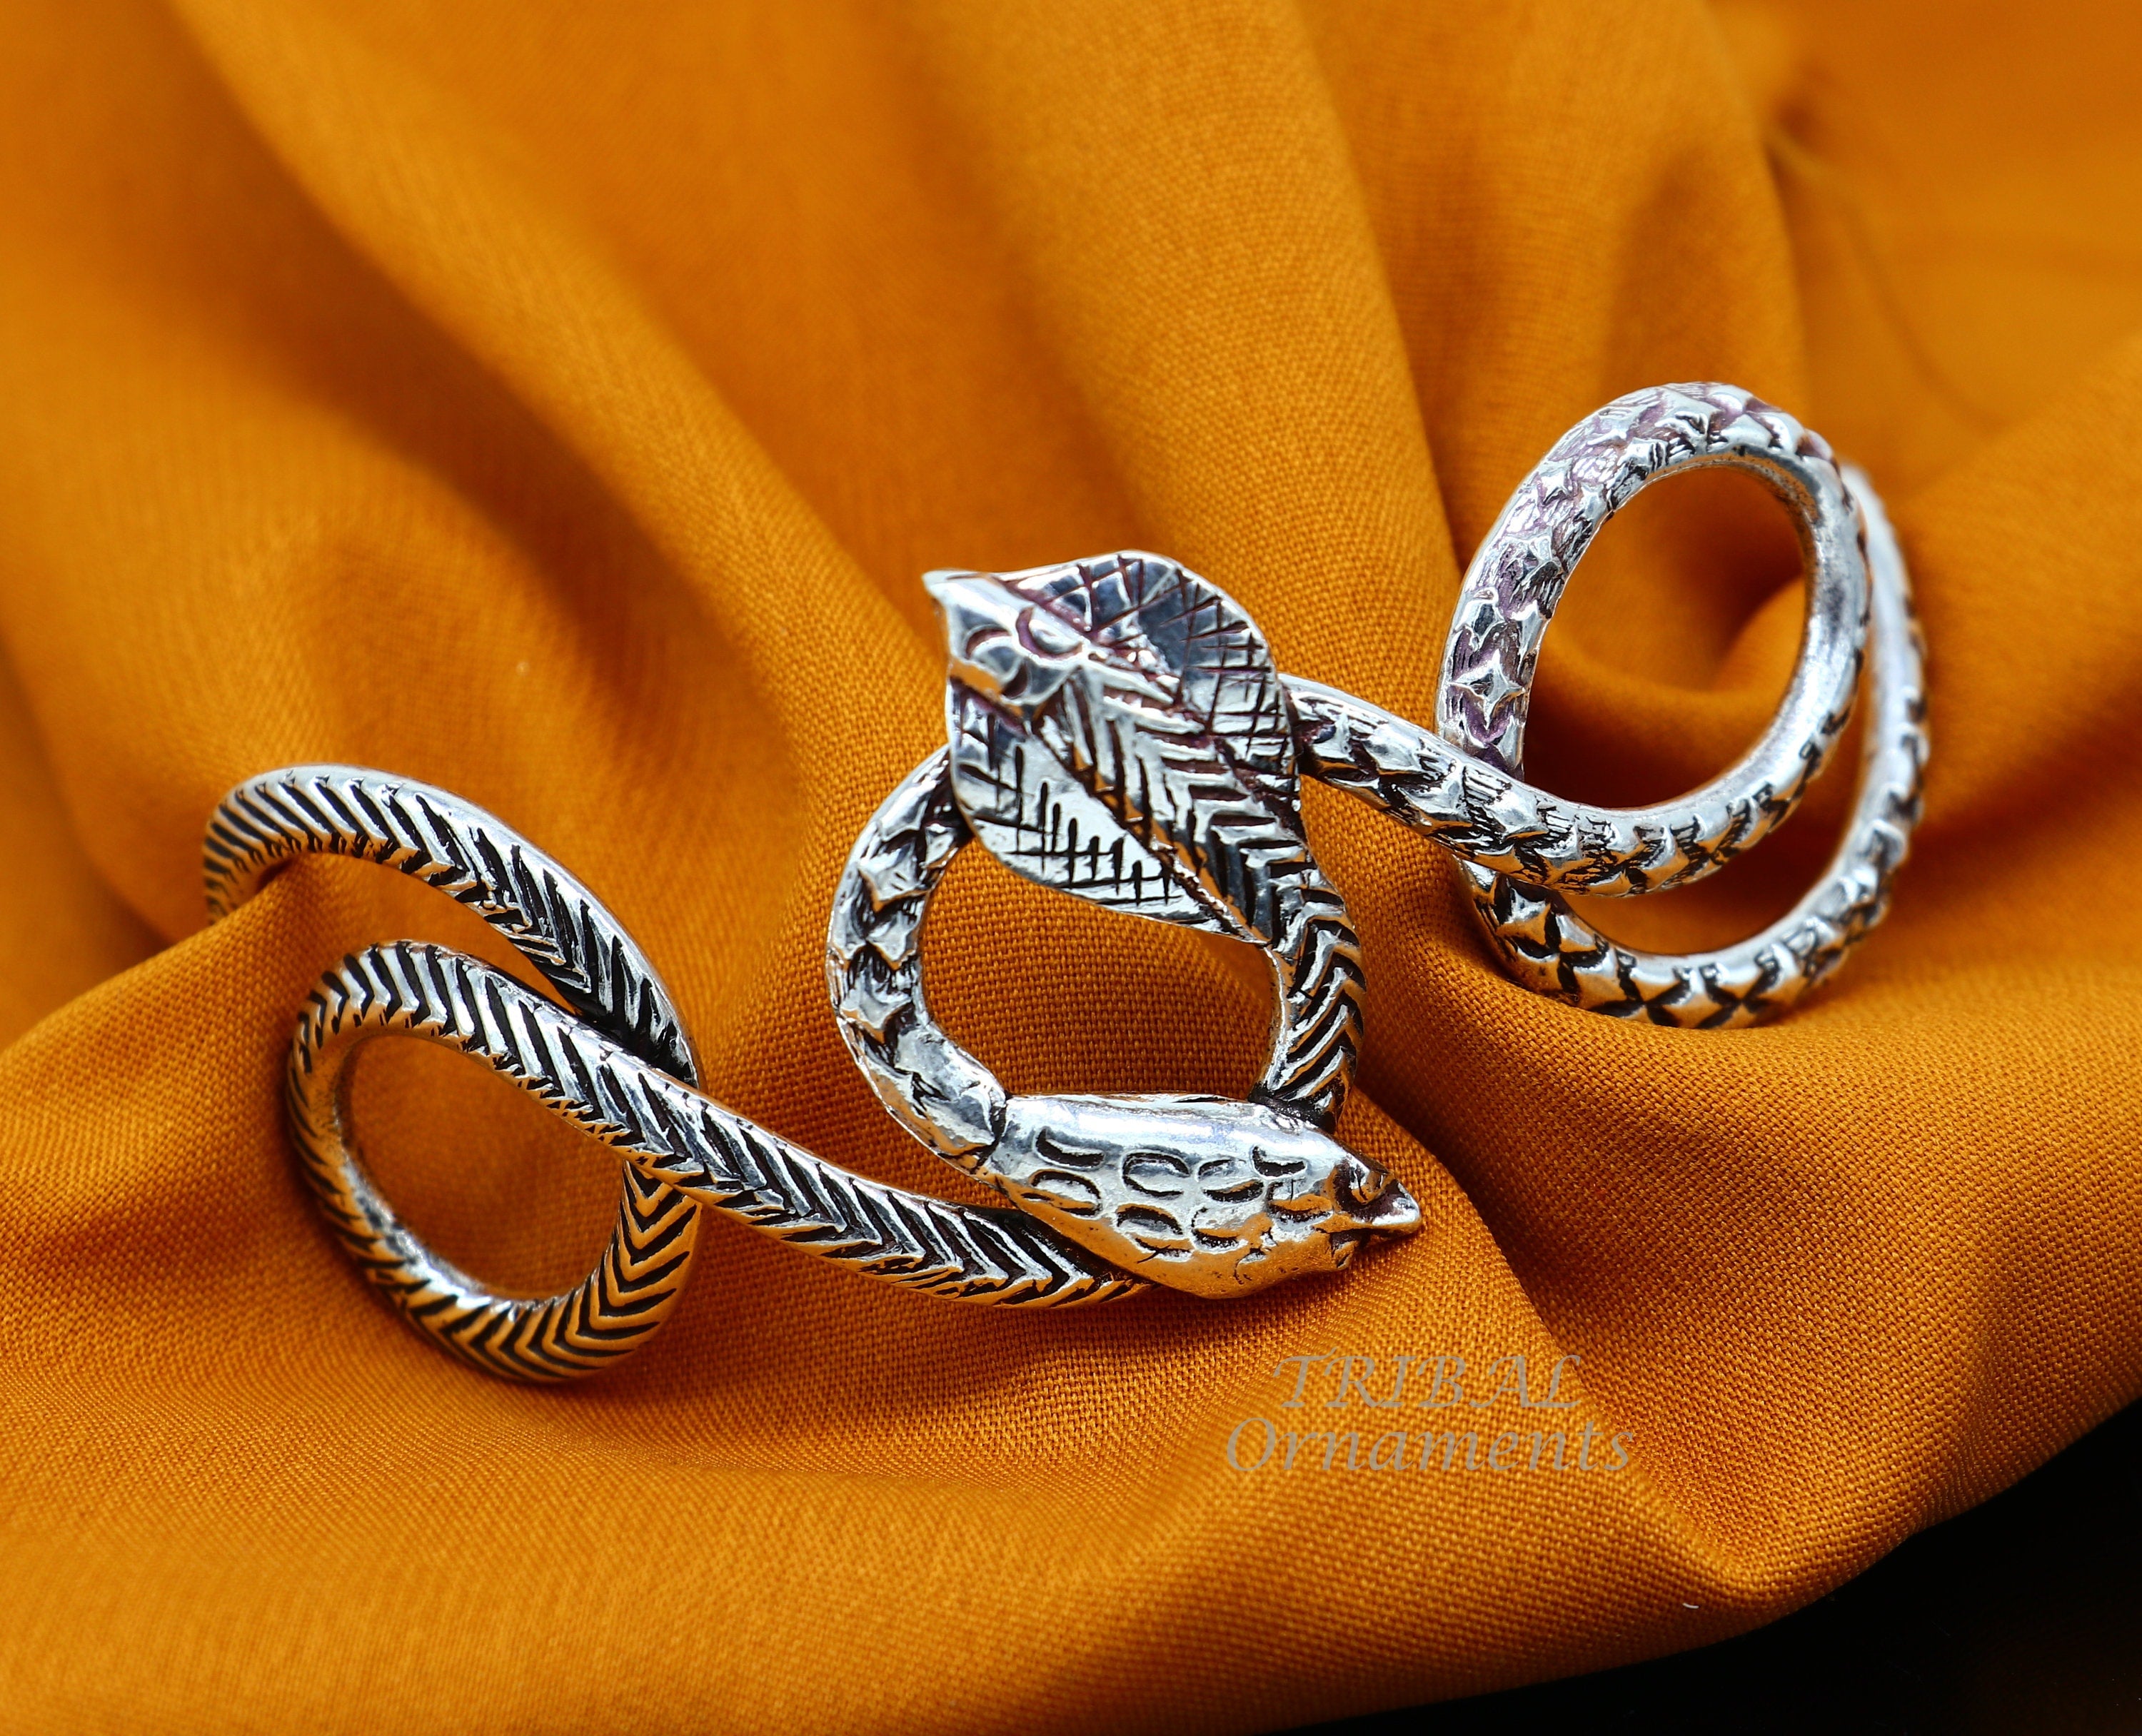 CABLE double bypass bracelet with snake shaped ends in stainless steel by  Taormina Jewelry